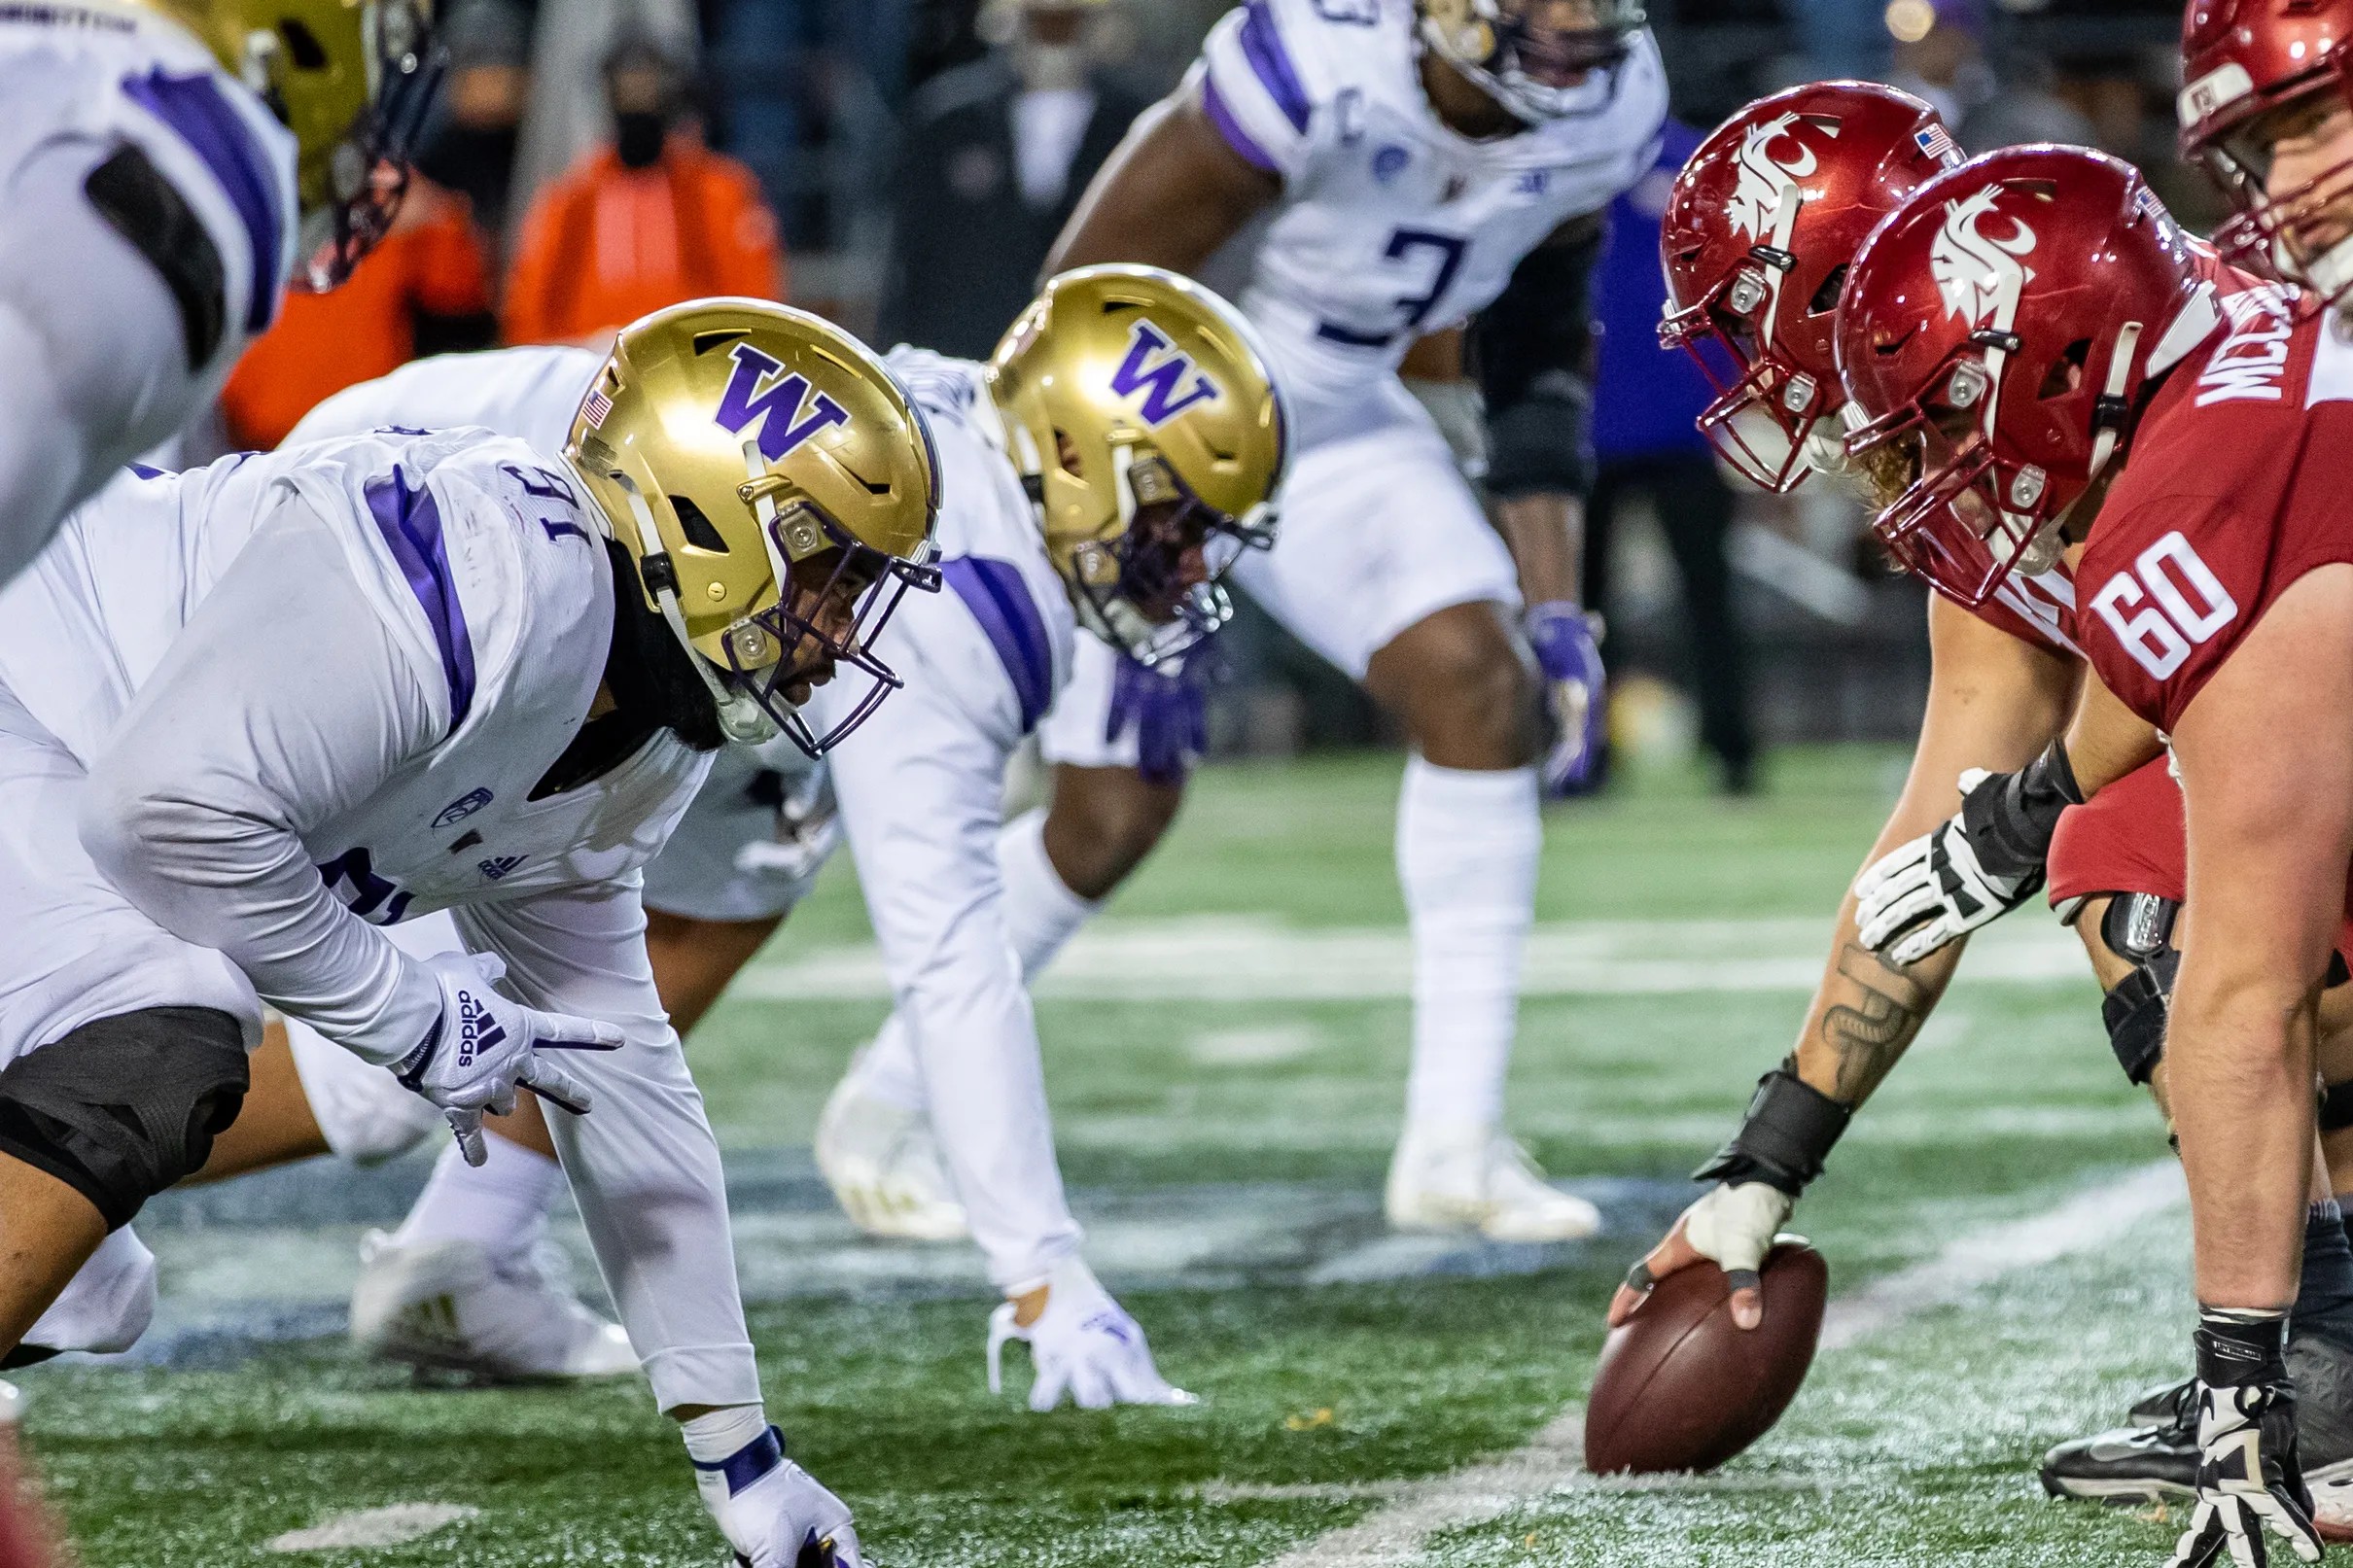 Apple Cup kickoff time announced